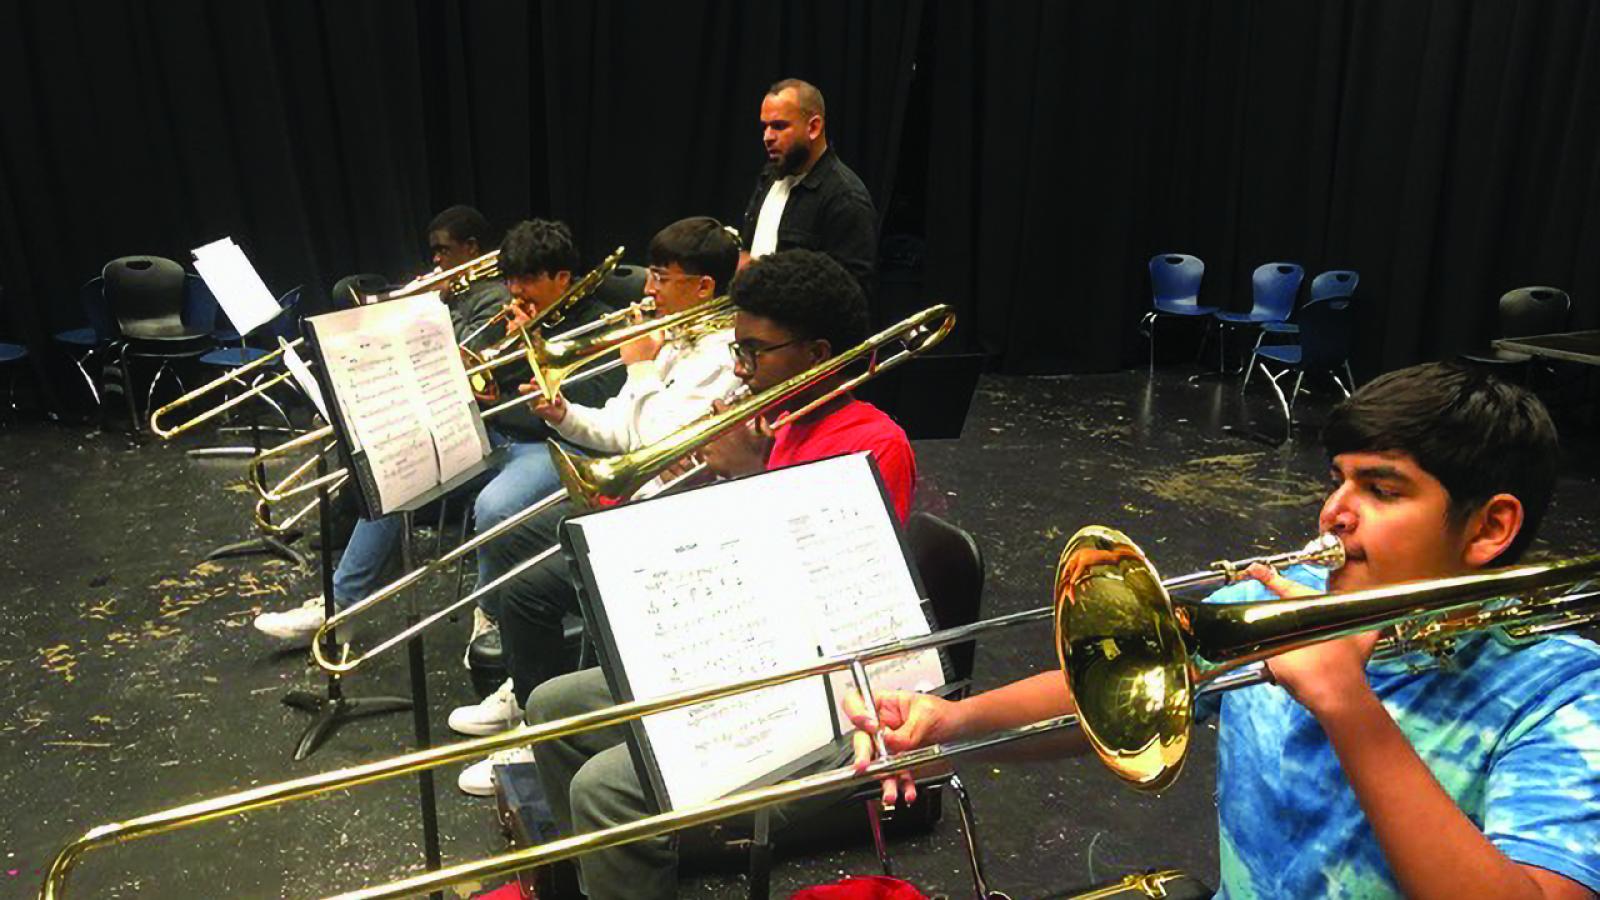 High school students playing trombone with musical stands near them, and man with shaved head and beard behind them instructing. 